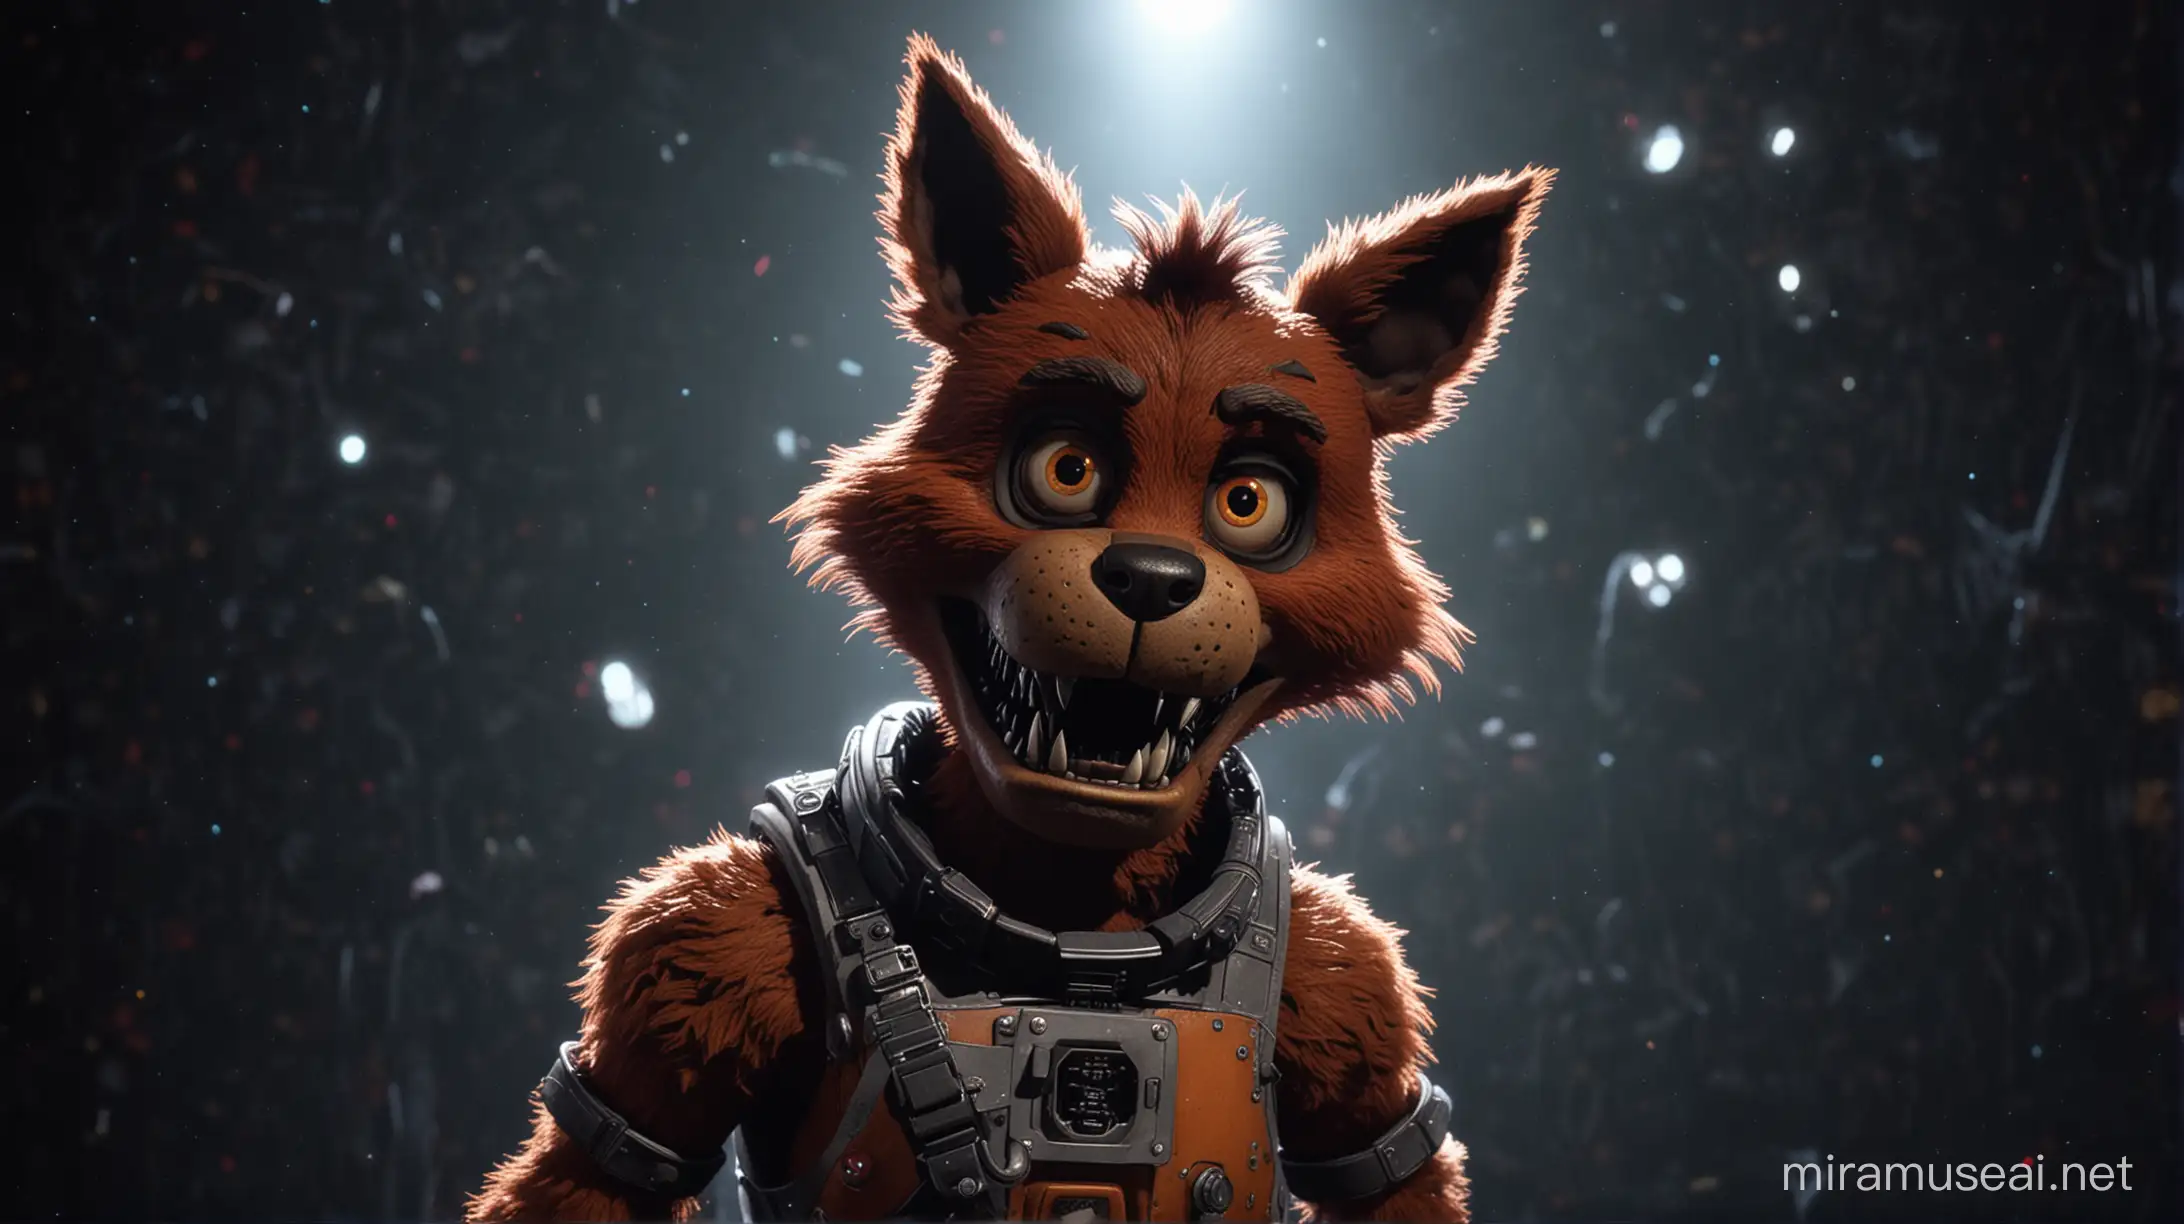  image of foxy from the movie five nights at freddy's, in space. 6k resolution, more realistic, based on the movie Five Nights at Freddy's